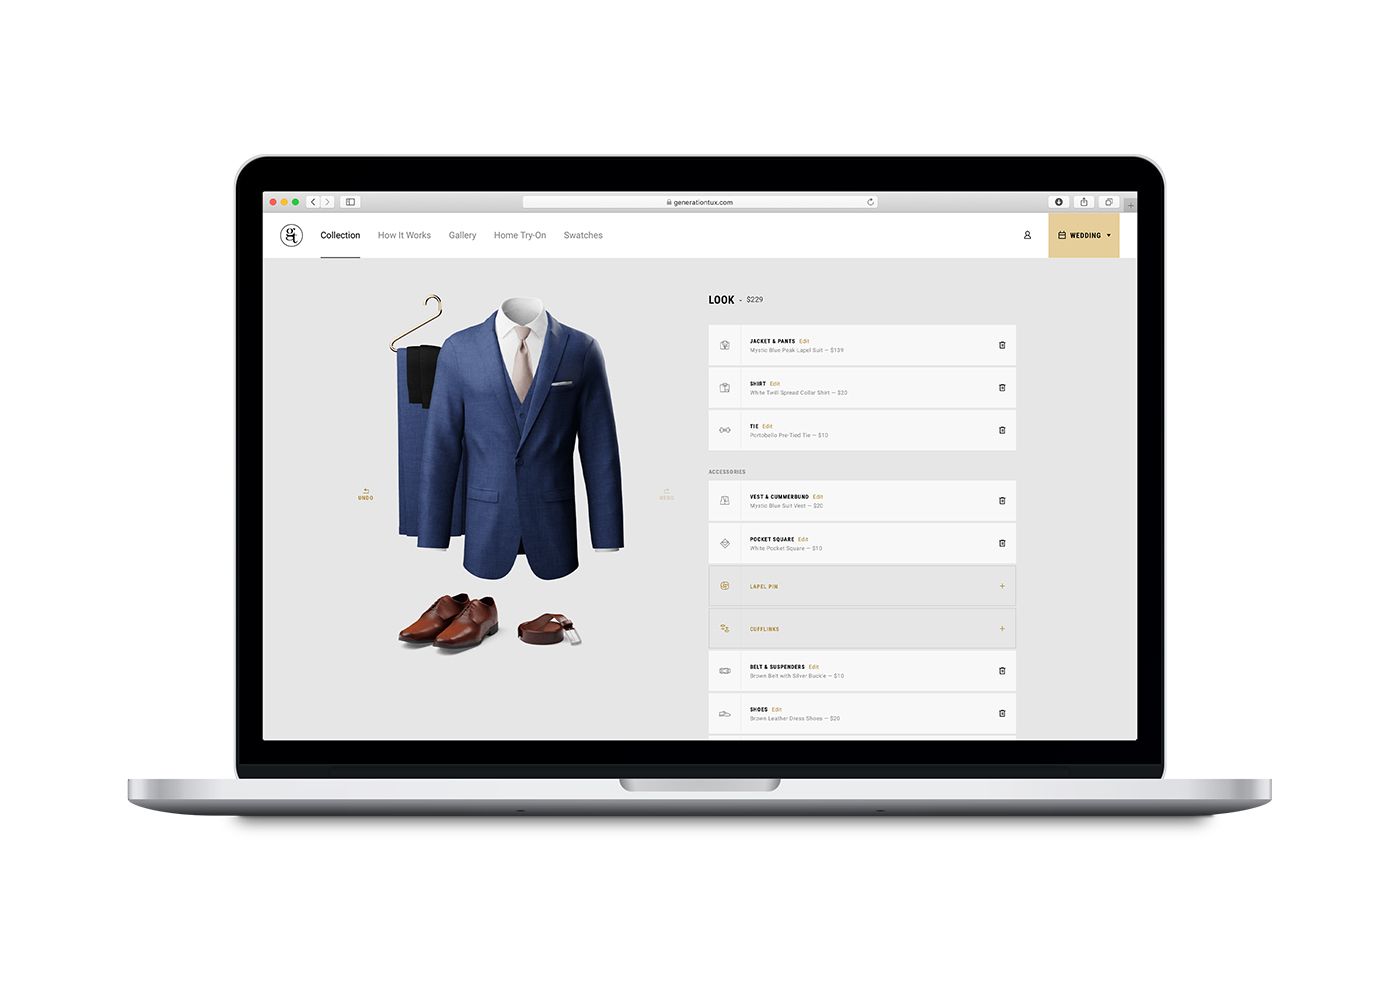 Build Your Own Suit - Tux Builder for Weddings & Other Events